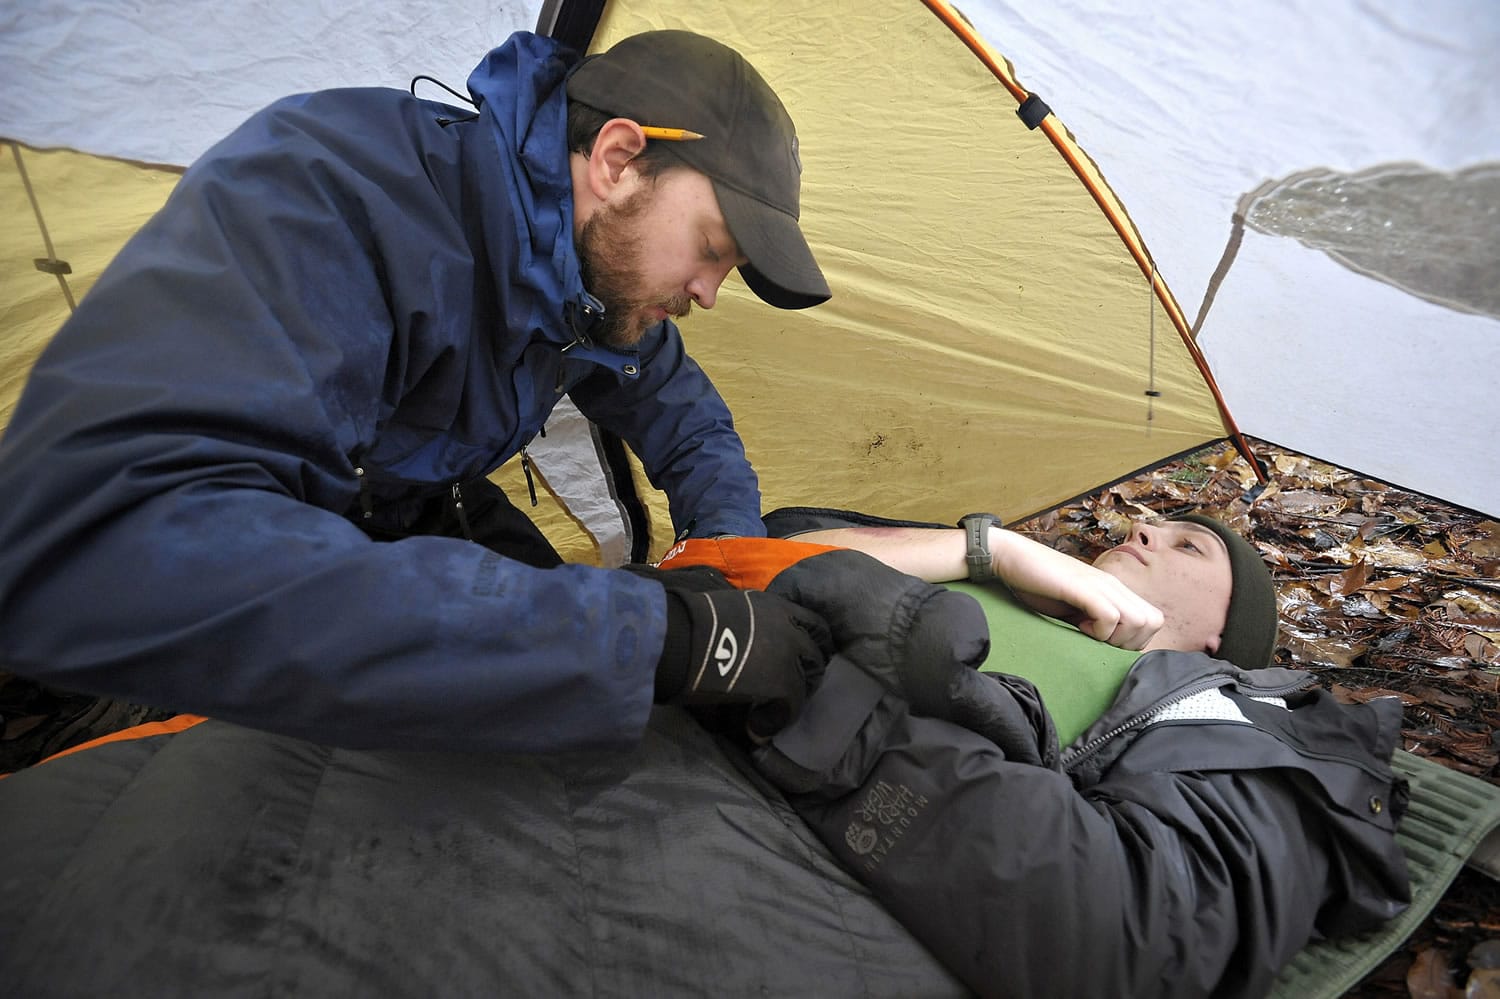 Oregon State University student Ben Church, left, examines fellow student Teddy White, while under a tent during a heavy rain as part of their wilderness first responders class final exam last month in Corvallis, Ore.